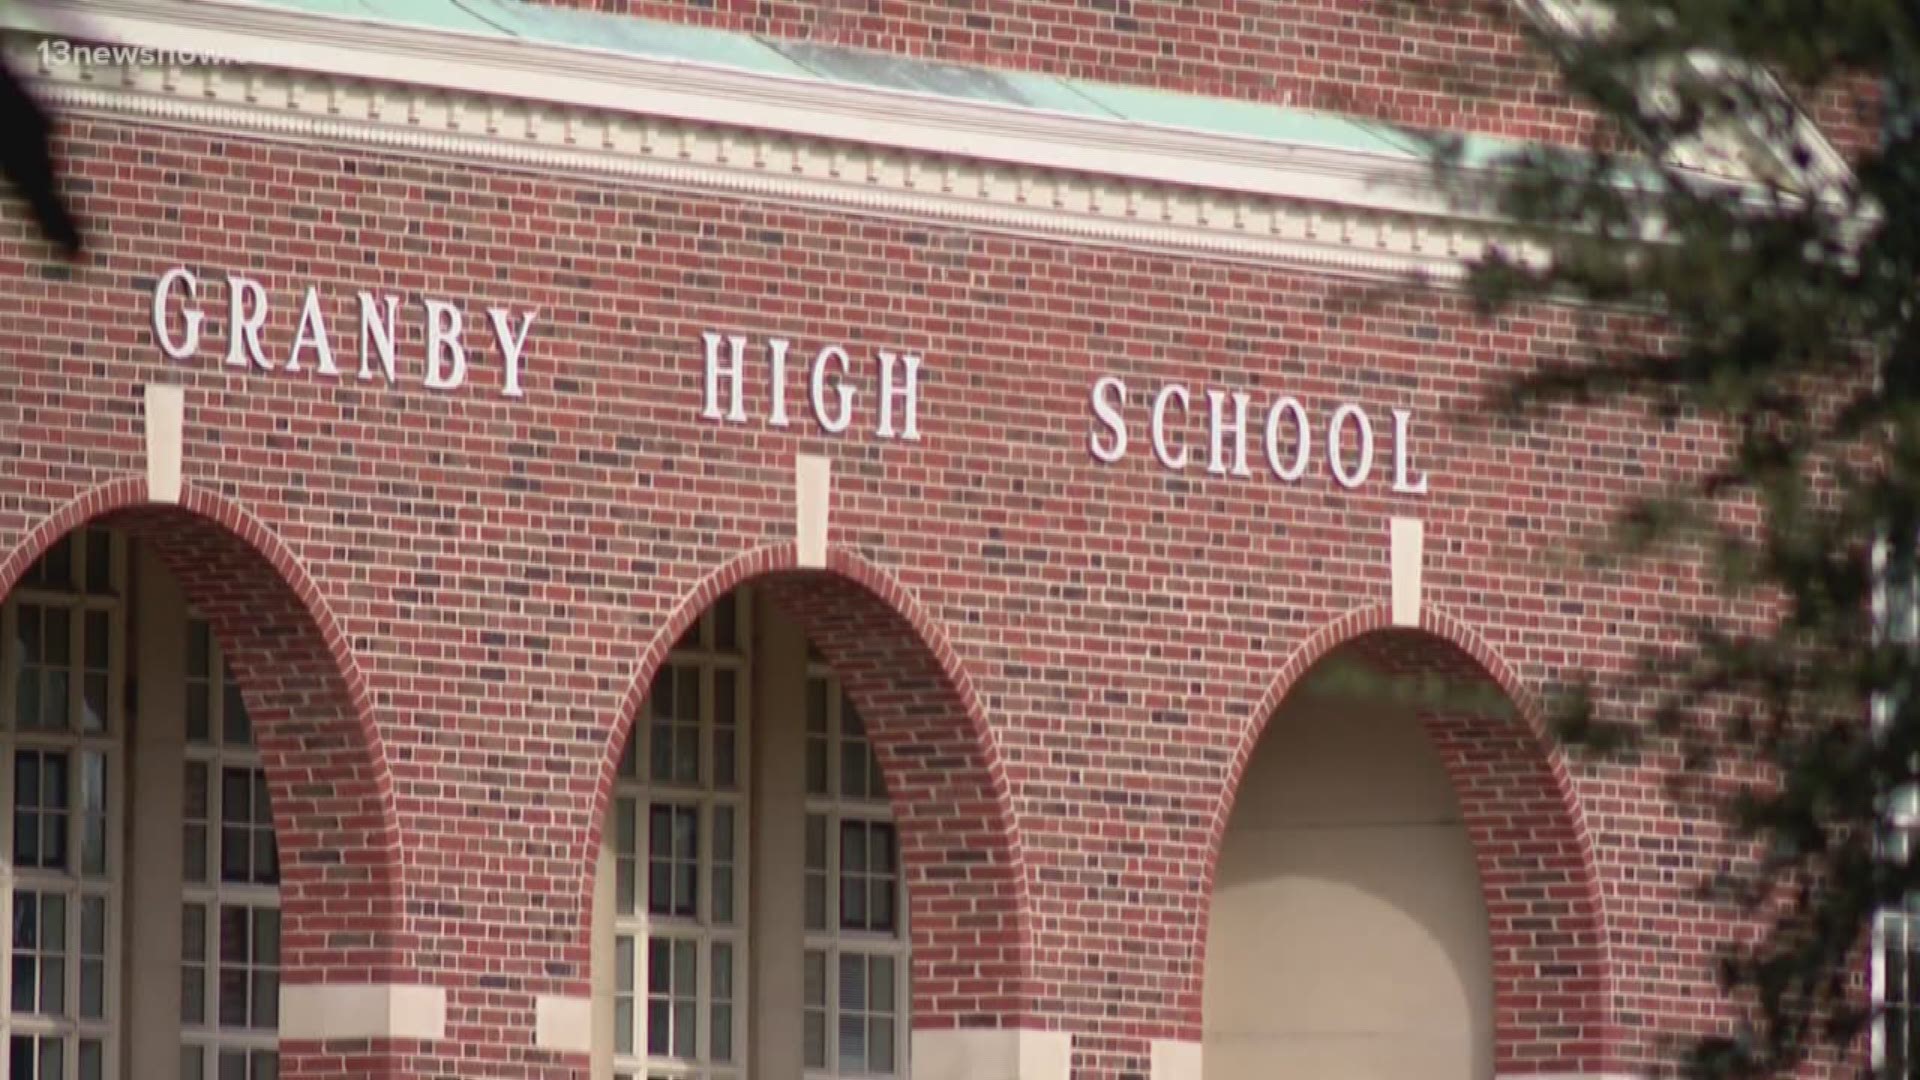 Norfolk Police say Granby High School went on lockdown because someone reported a student with a gun. The student was searched and no gun was found.